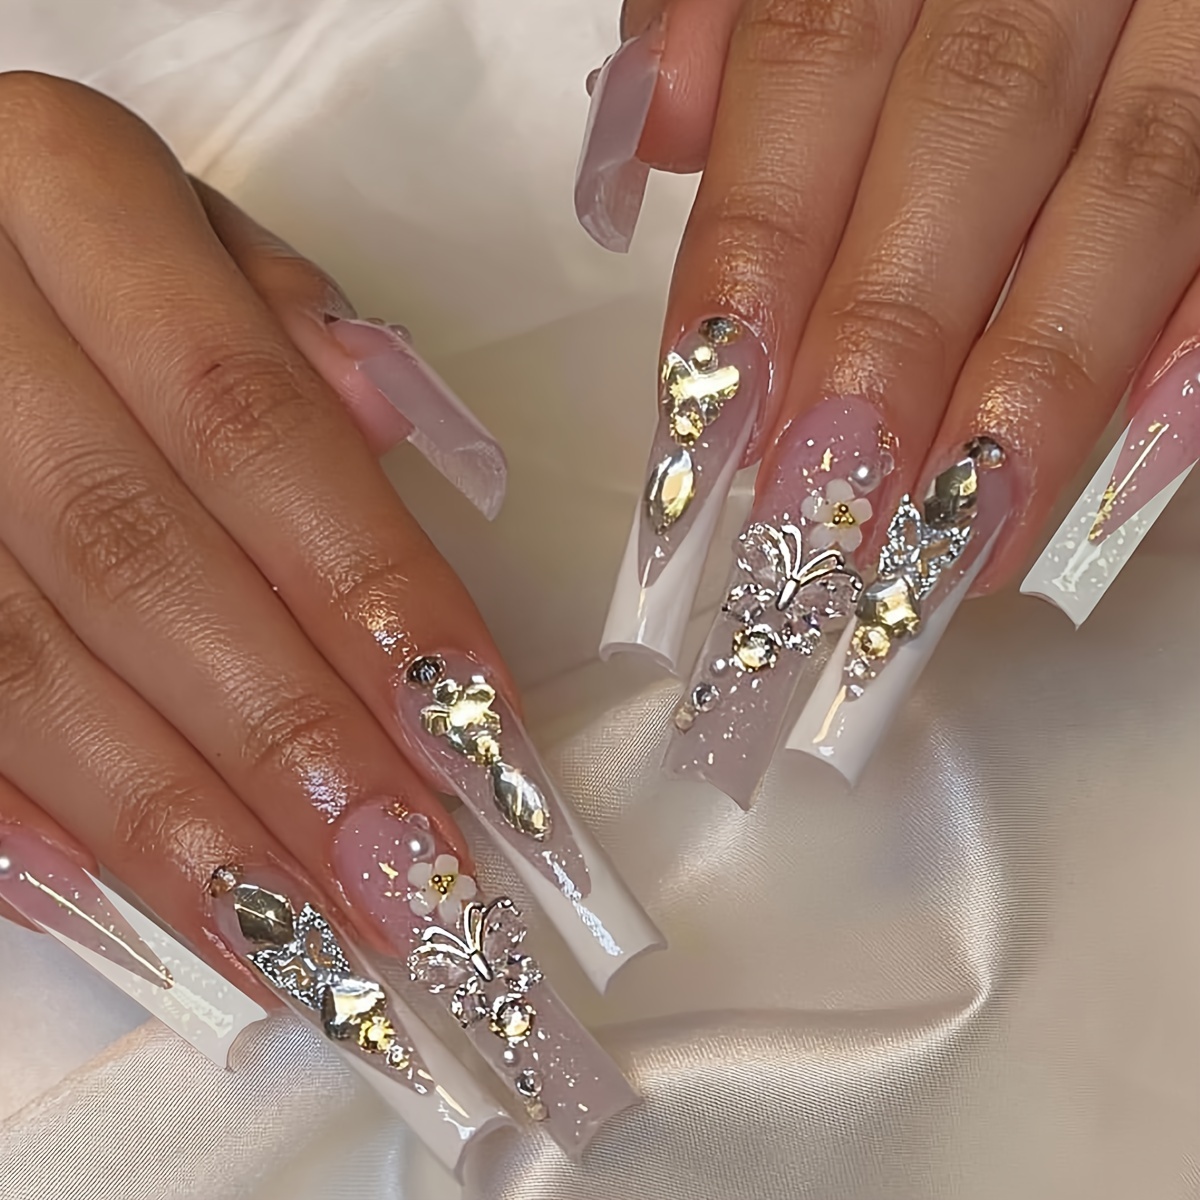 

24pcs Glossy Pinkish Long Square Fake Nails, White French Tip Press On Nails With 3d Flower, Butterfly Ang Golden Heart Rhinestone Design, Luxury False Nails For Women Girls - Dance, Party Wear